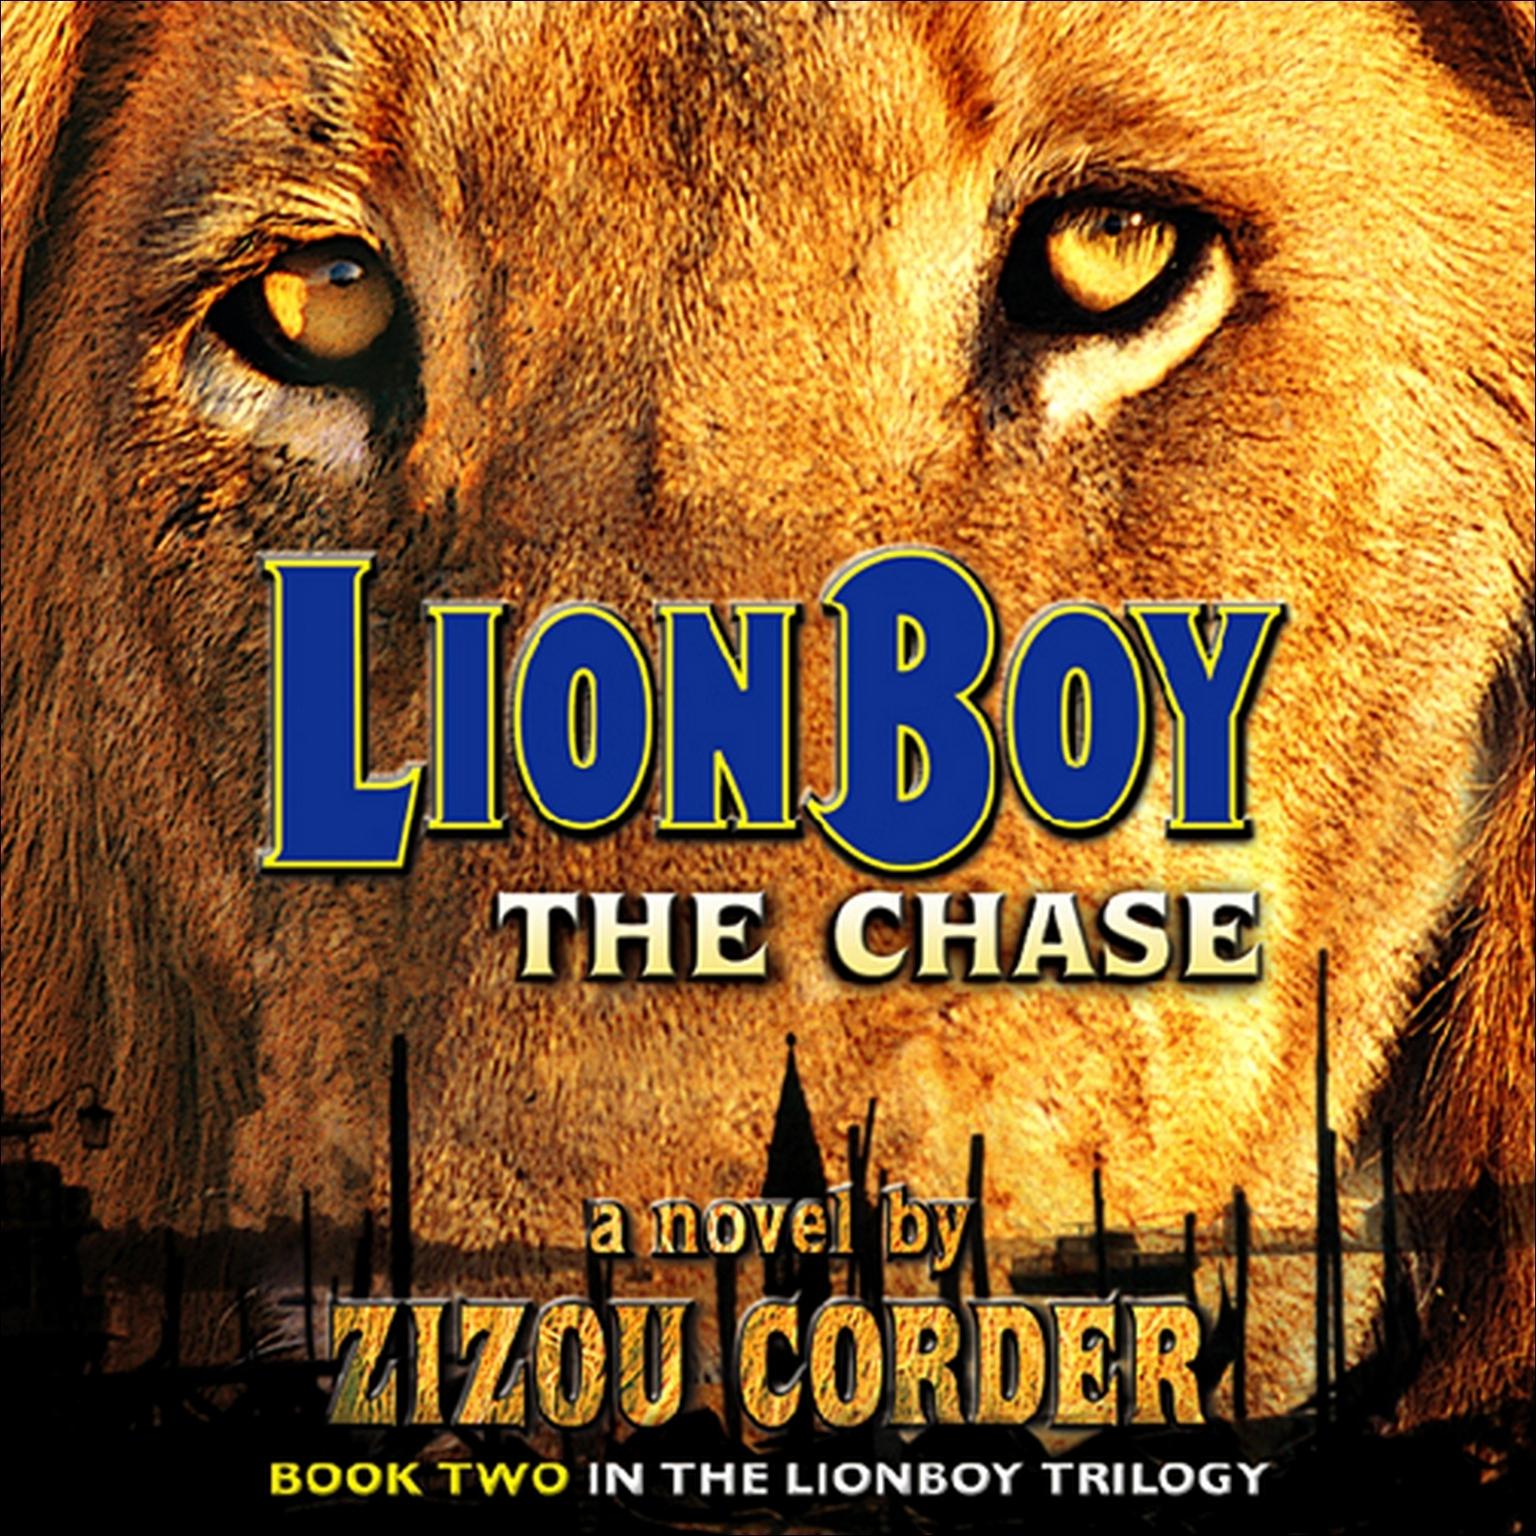 Lionboy: The Chase: Lionboy Audiobook, by Zizou Corder